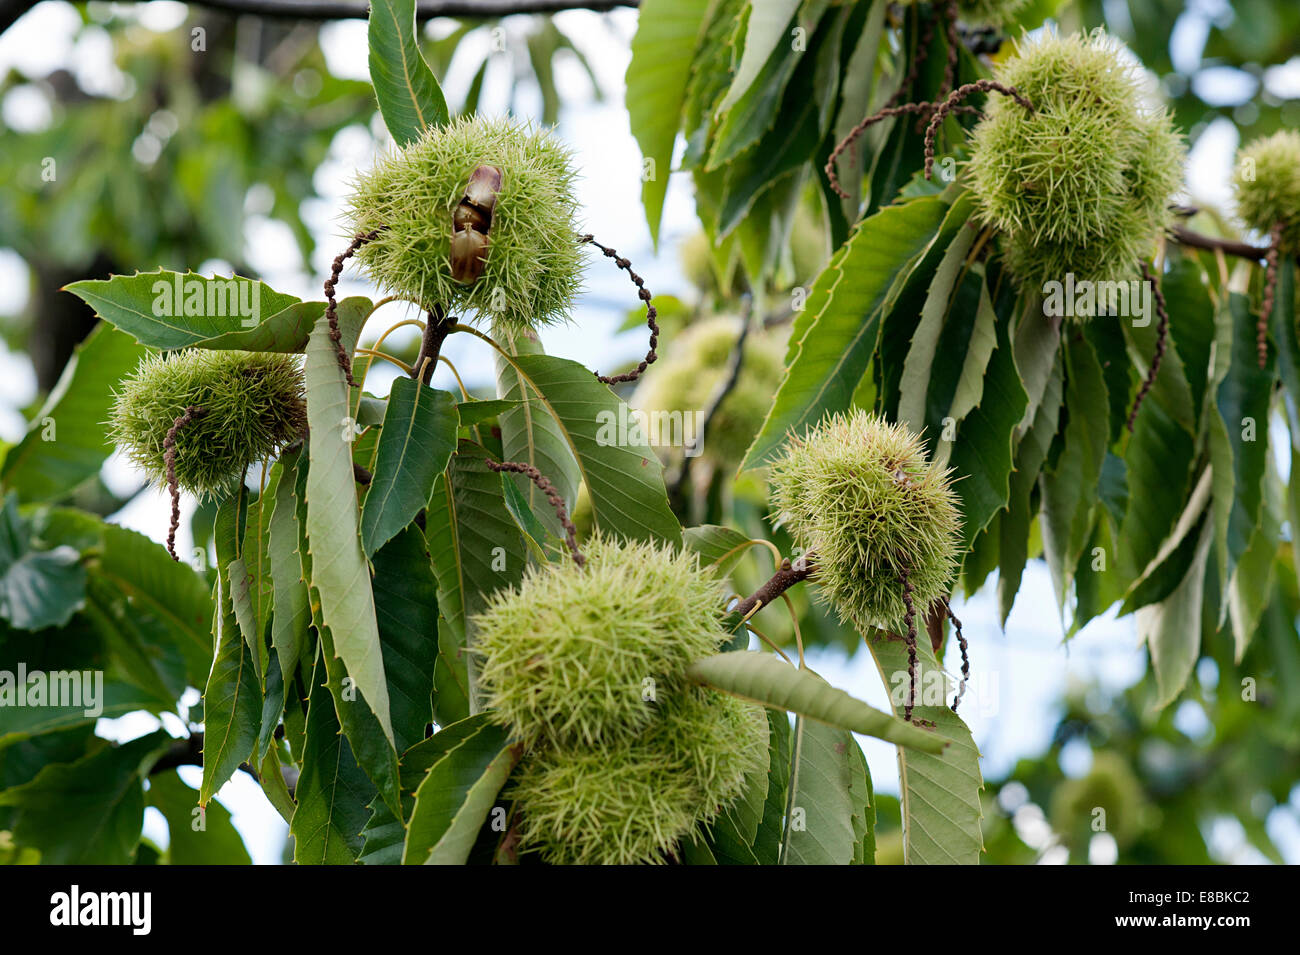 Kew Gardens section of horse chestnut tree prickly seed casings on the ...